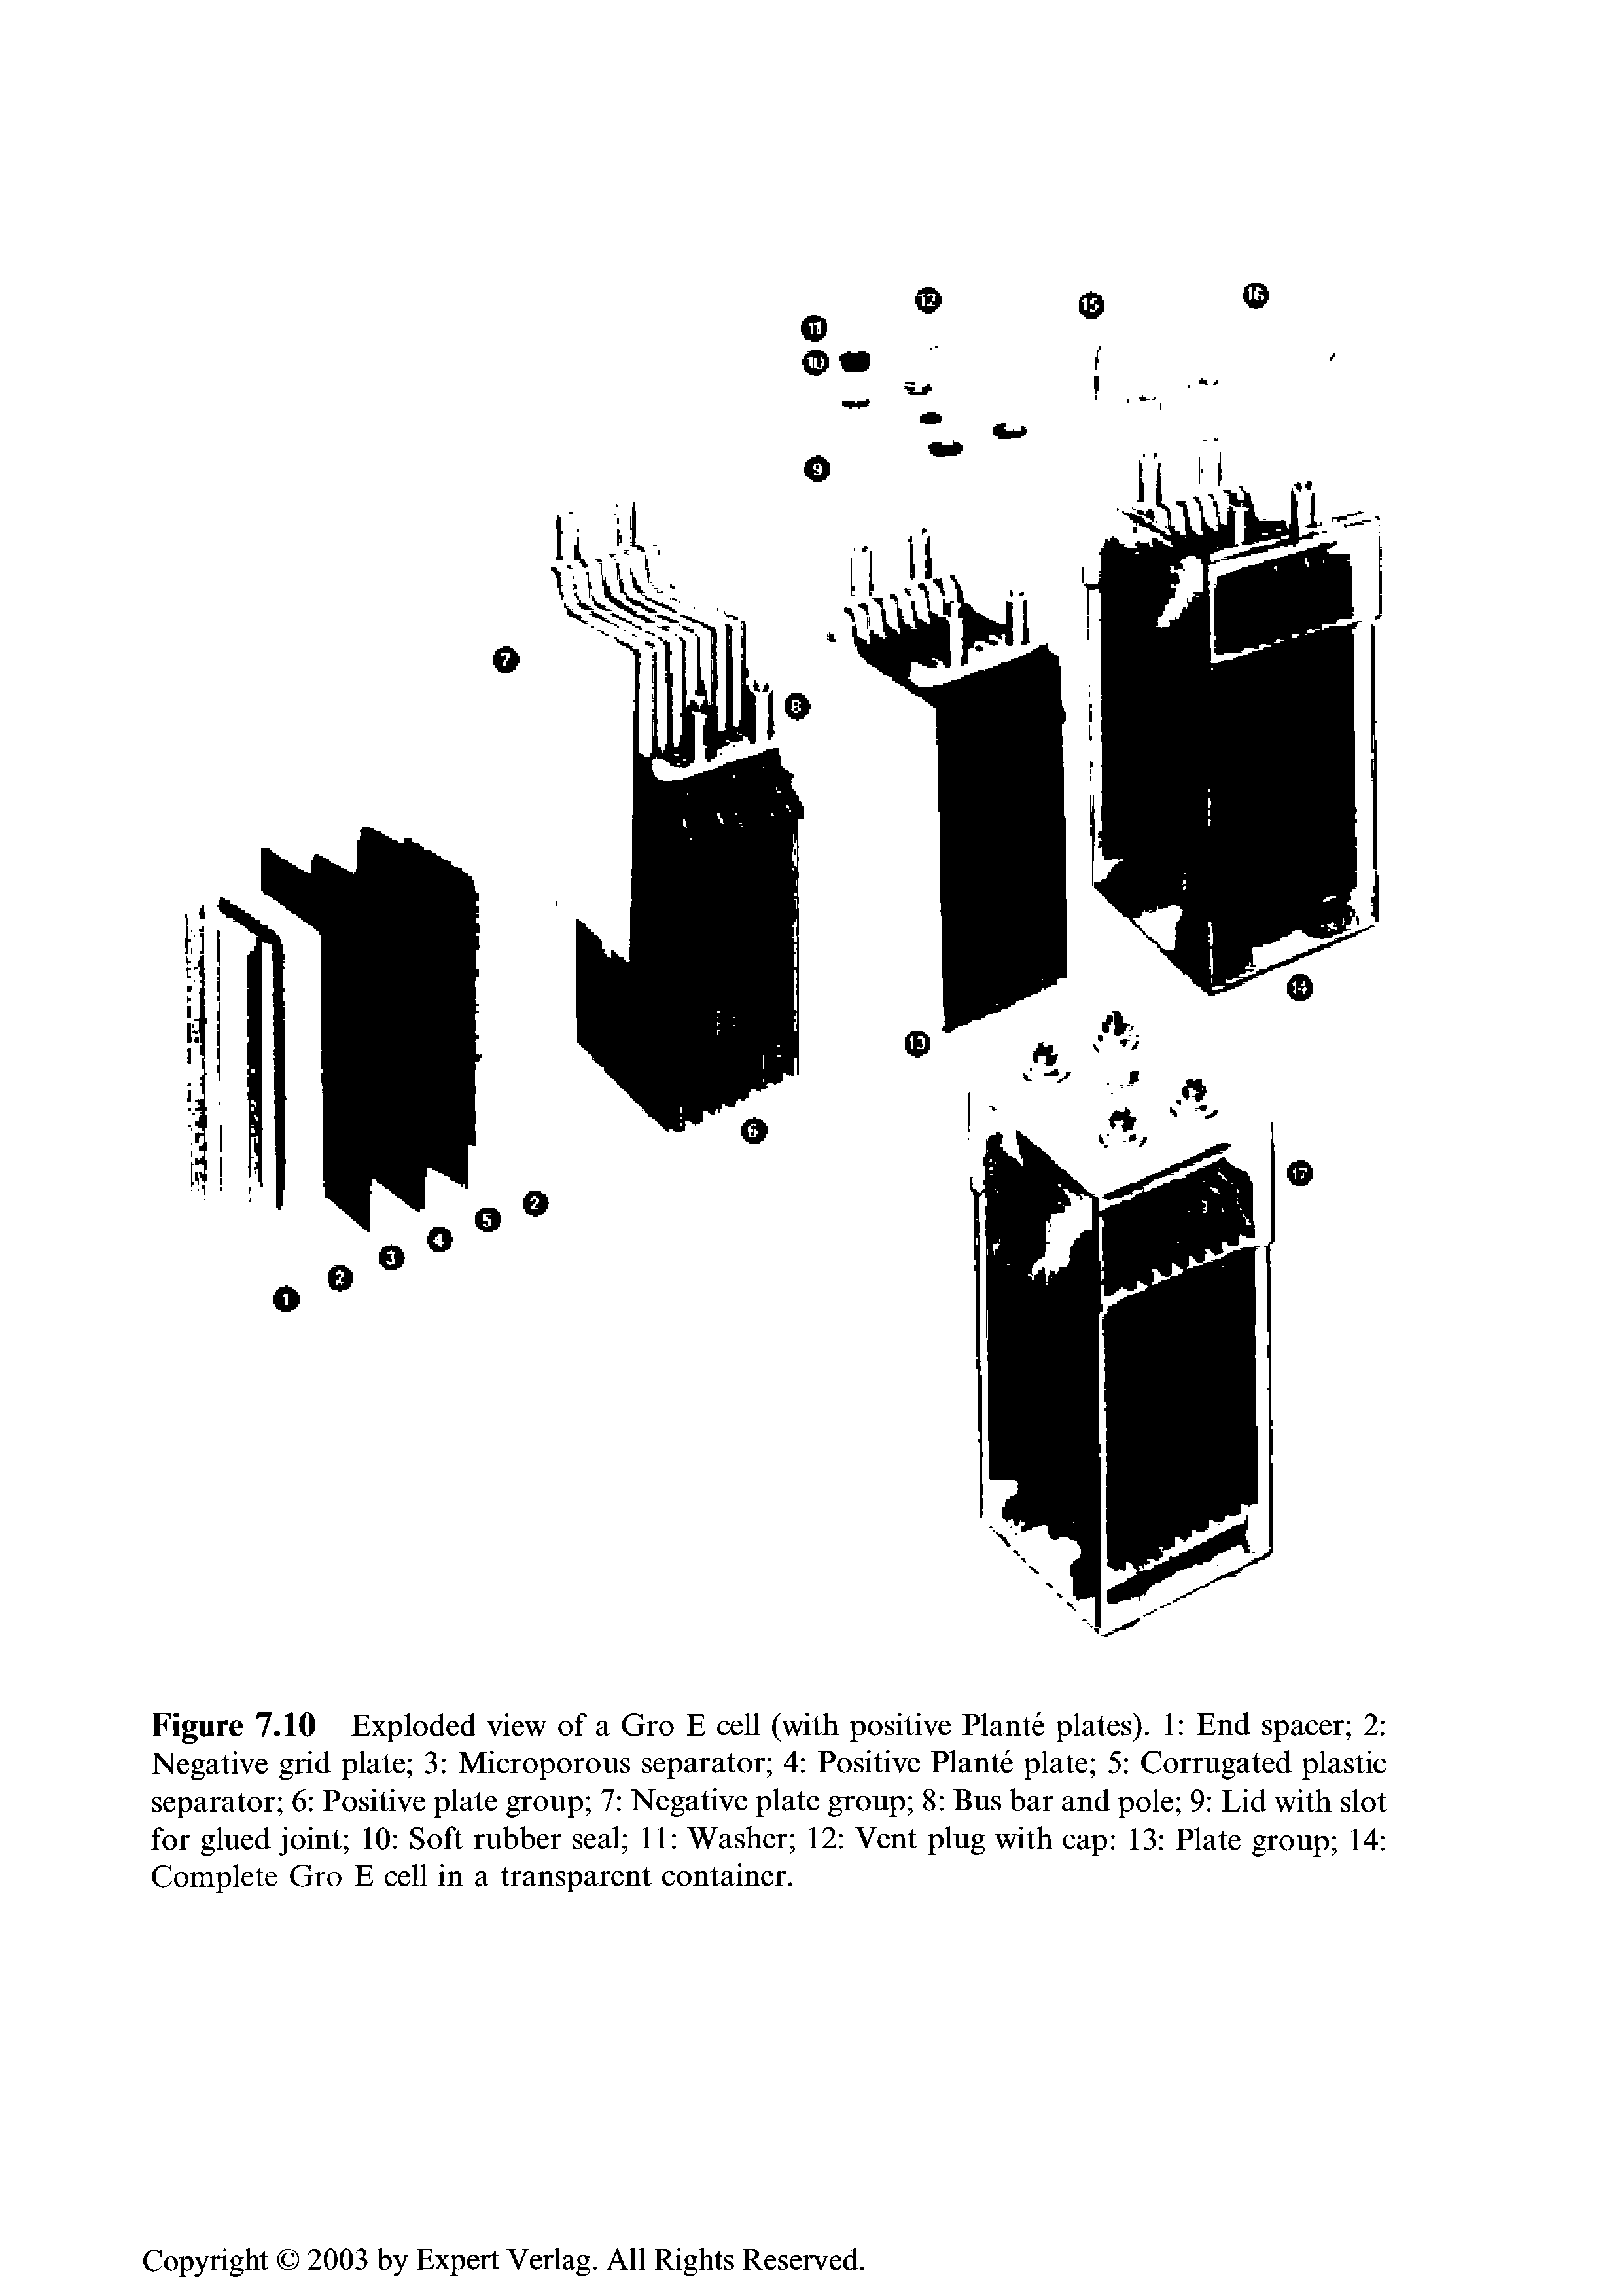 Figure 7.10 Exploded view of a Gro E cell (with positive Plante plates). 1 End spacer 2 Negative grid plate 3 Microporous separator 4 Positive Plante plate 5 Corrugated plastic separator 6 Positive plate group 7 Negative plate group 8 Bus bar and pole 9 Lid with slot for glued joint 10 Soft rubber seal 11 Washer 12 Vent plug with cap 13 Plate group 14 Complete Gro E cell in a transparent container.